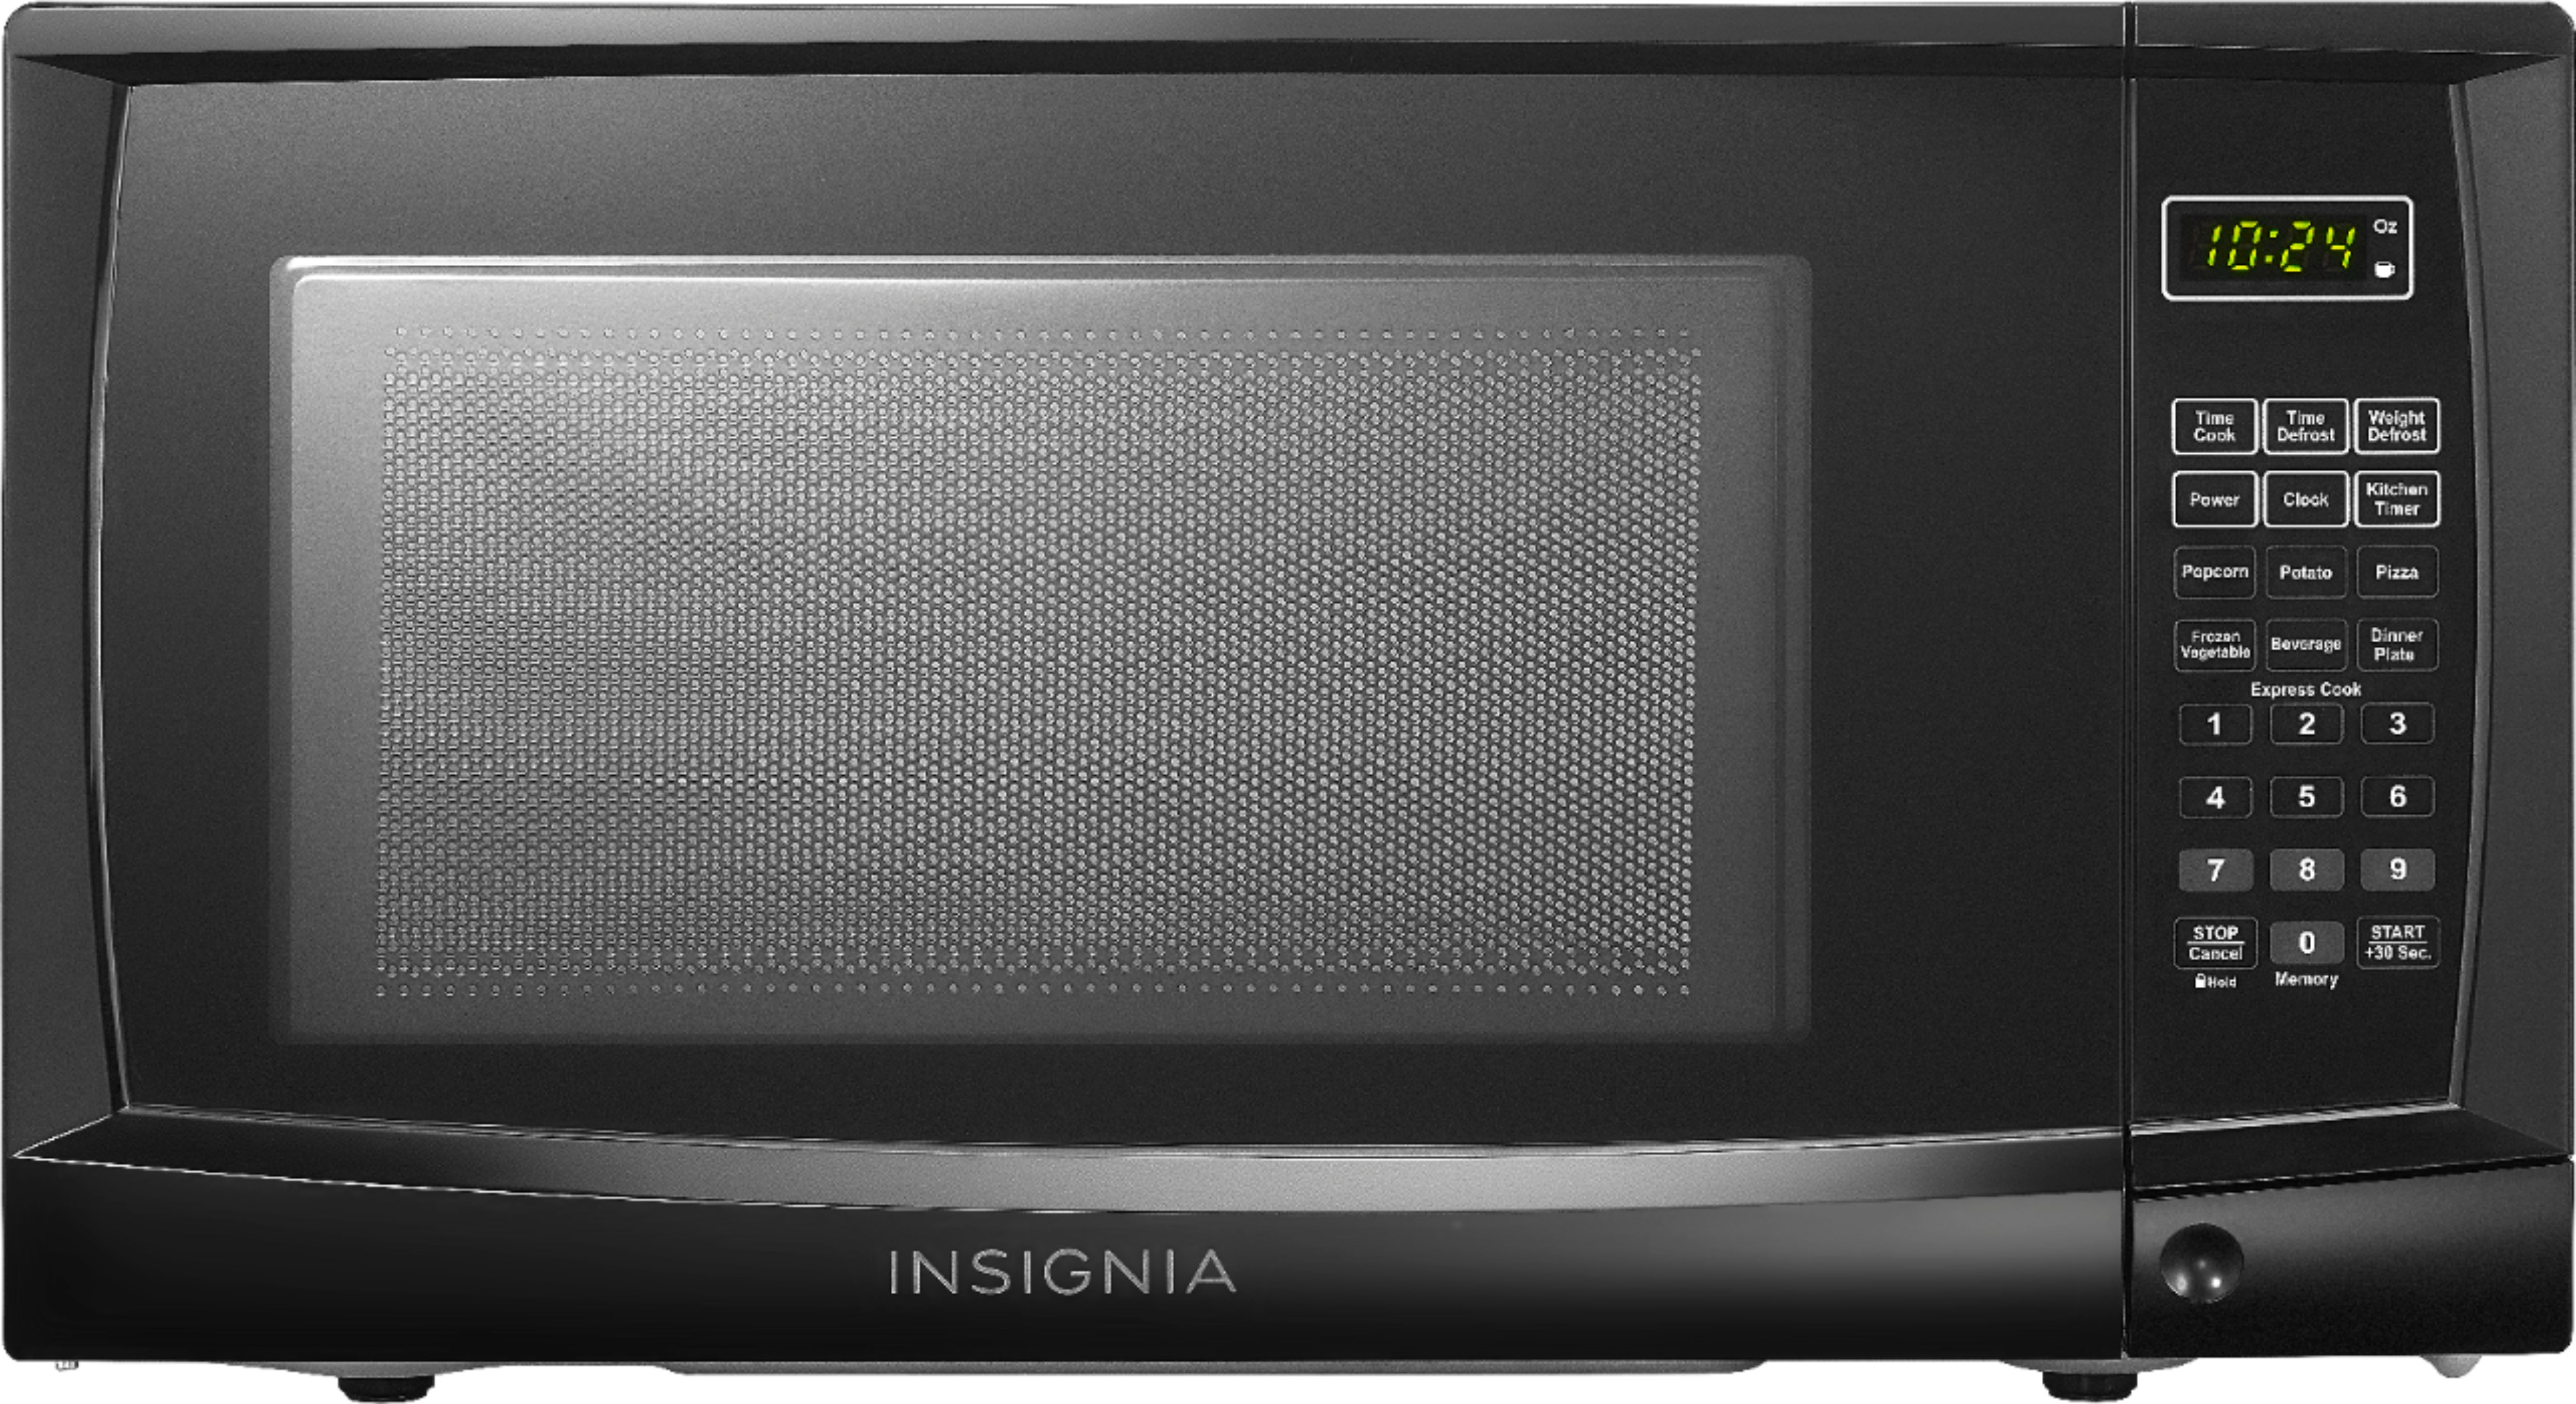 0 7 Cu Ft Compact Microwave Black Ns, 0 7 Cu Ft Countertop Microwave Oven